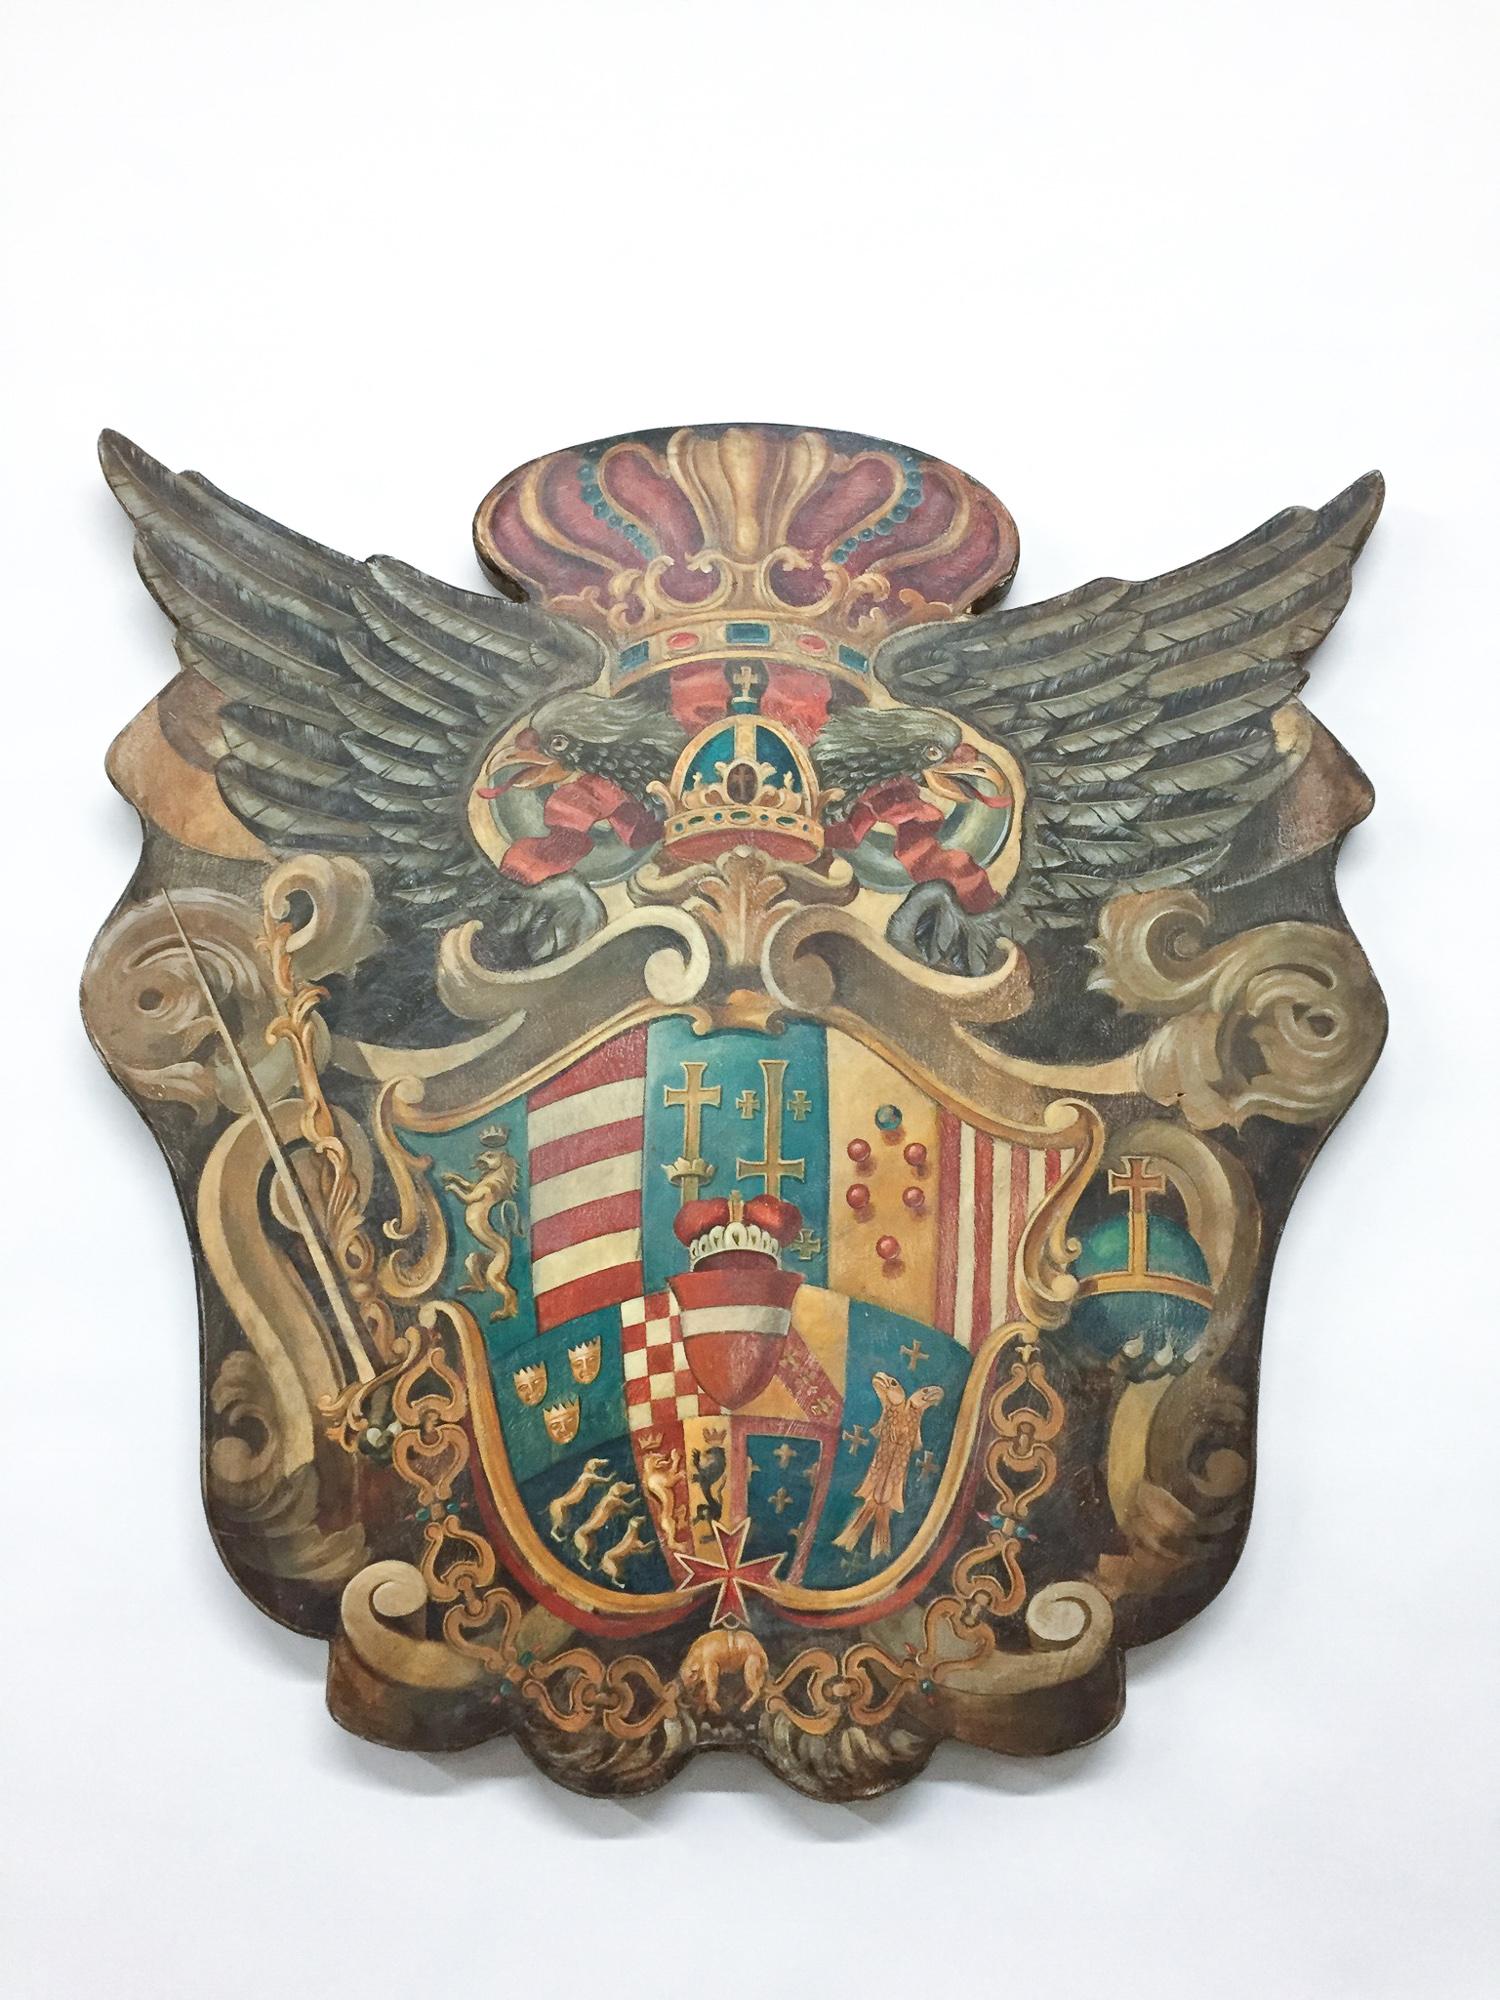 This is a wonderful handmade Baronial Crest Plaque on solid wood, featuring imagery tied to heraldry of the the House of Habsburg-Lorraine, originating from the marriage in 1736 of Francis III, Duke of Lorraine and Bar, and Maria Theresa of Austria,